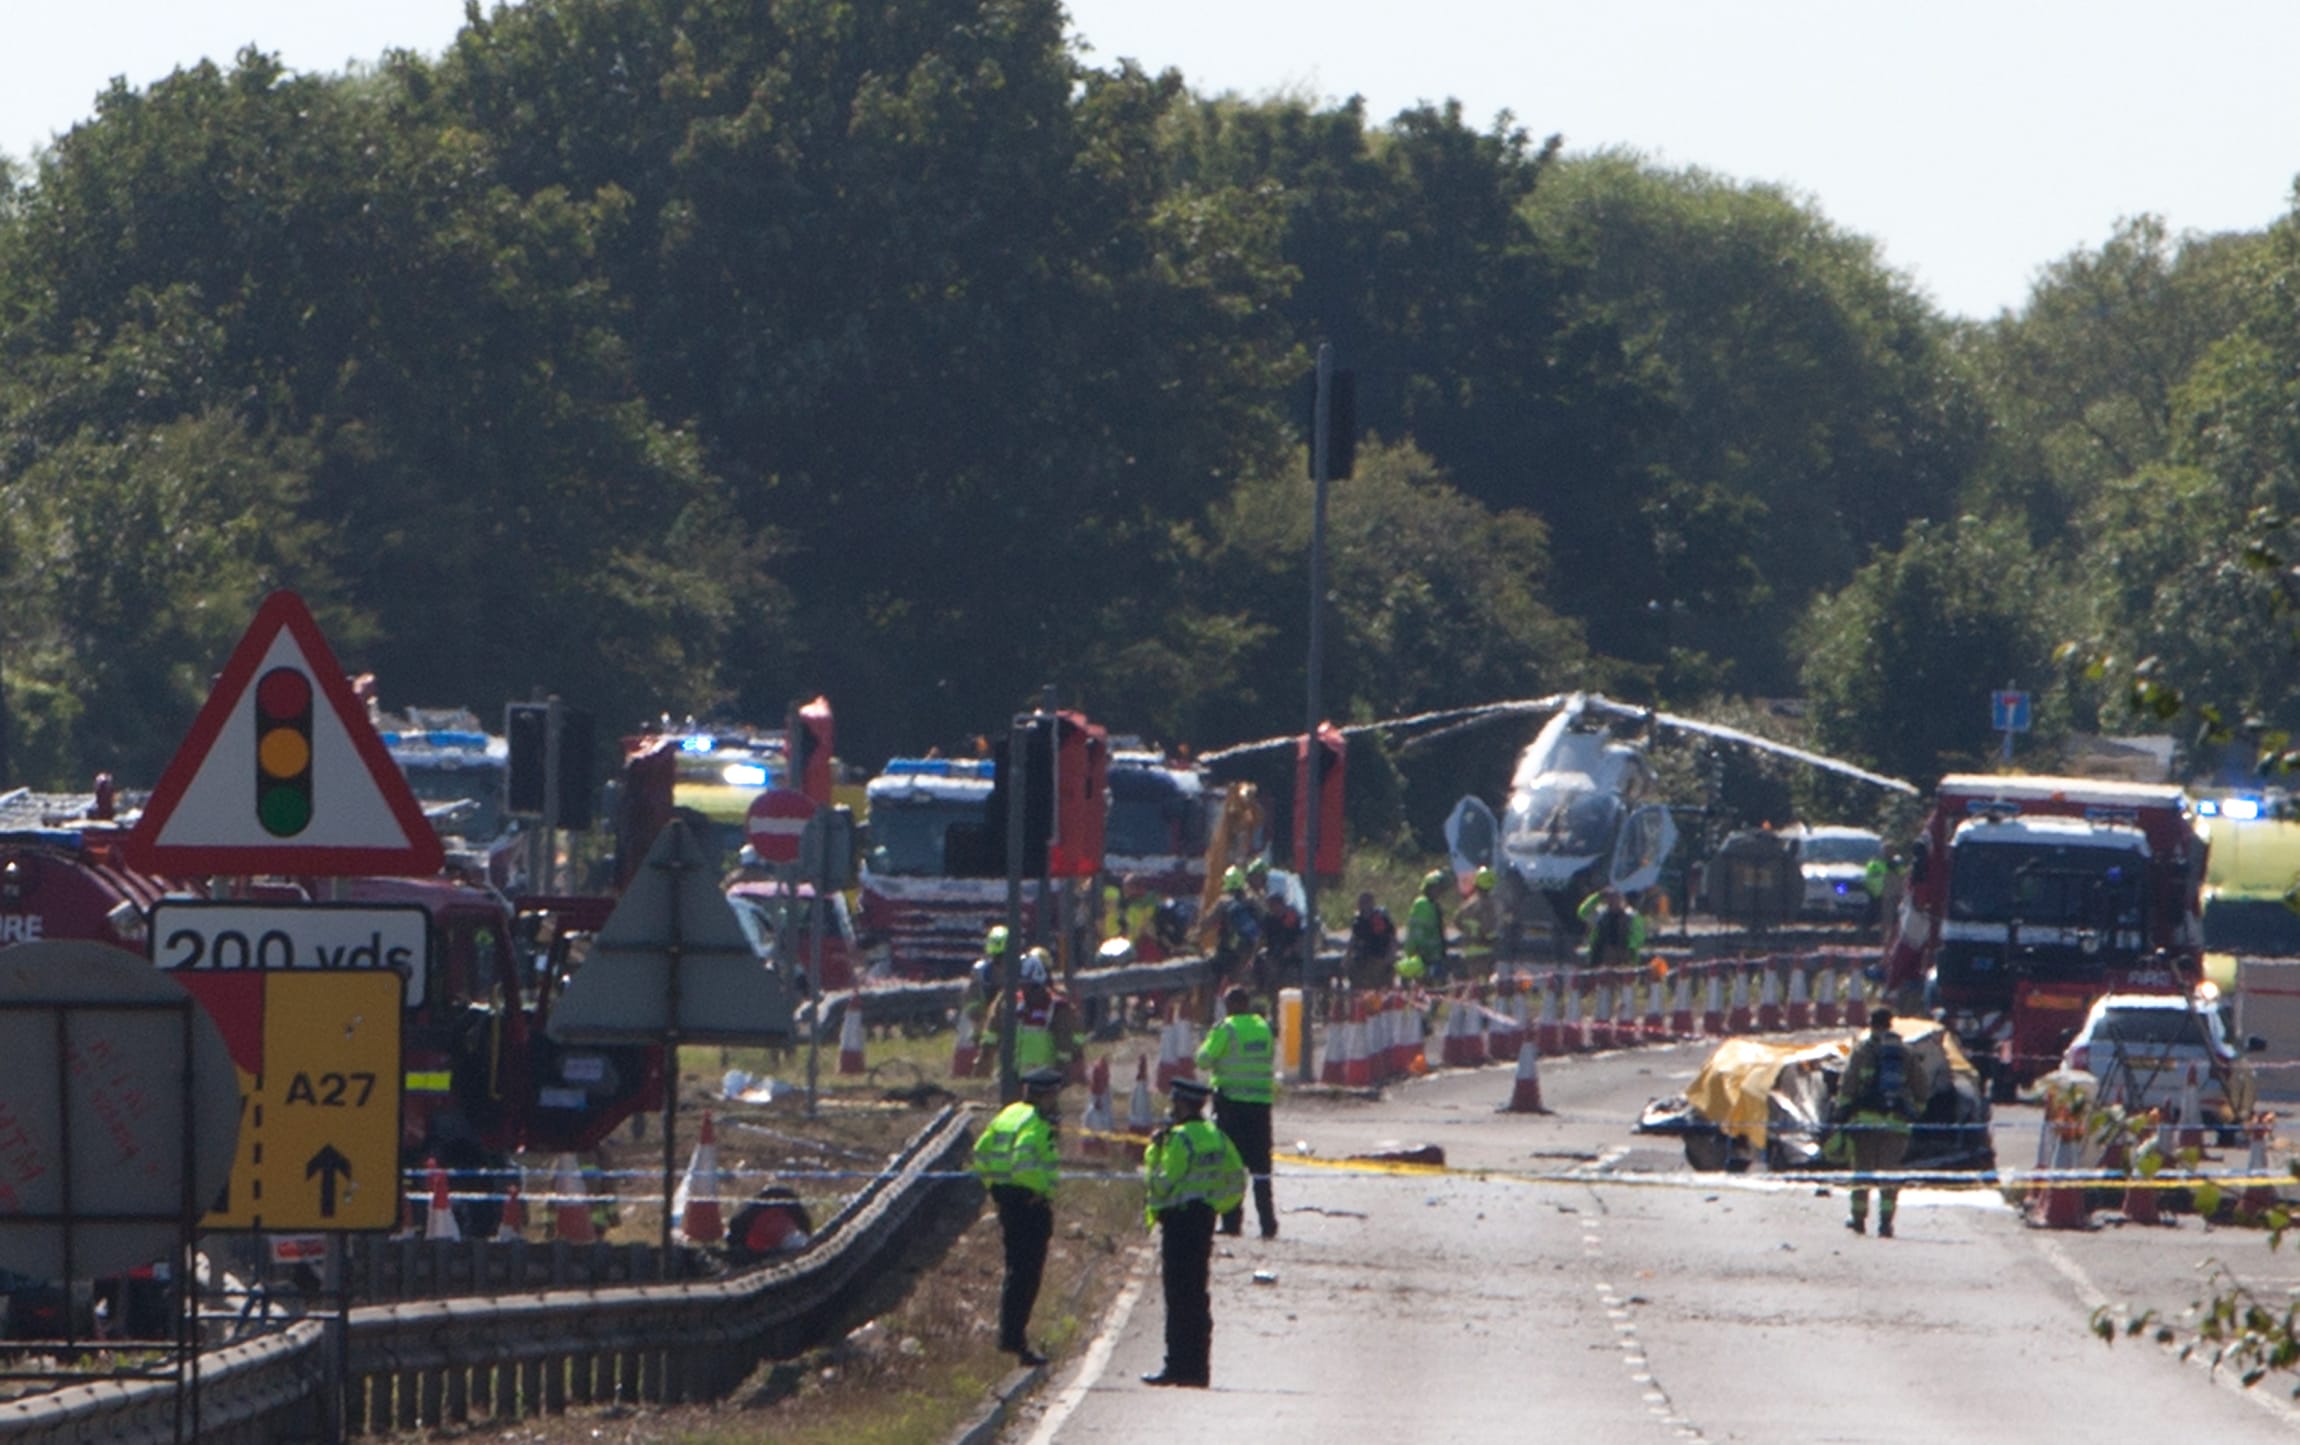 Police and emergency services workers at the scene of a plane crash at Shoreham Air Show, 22 August 2015.